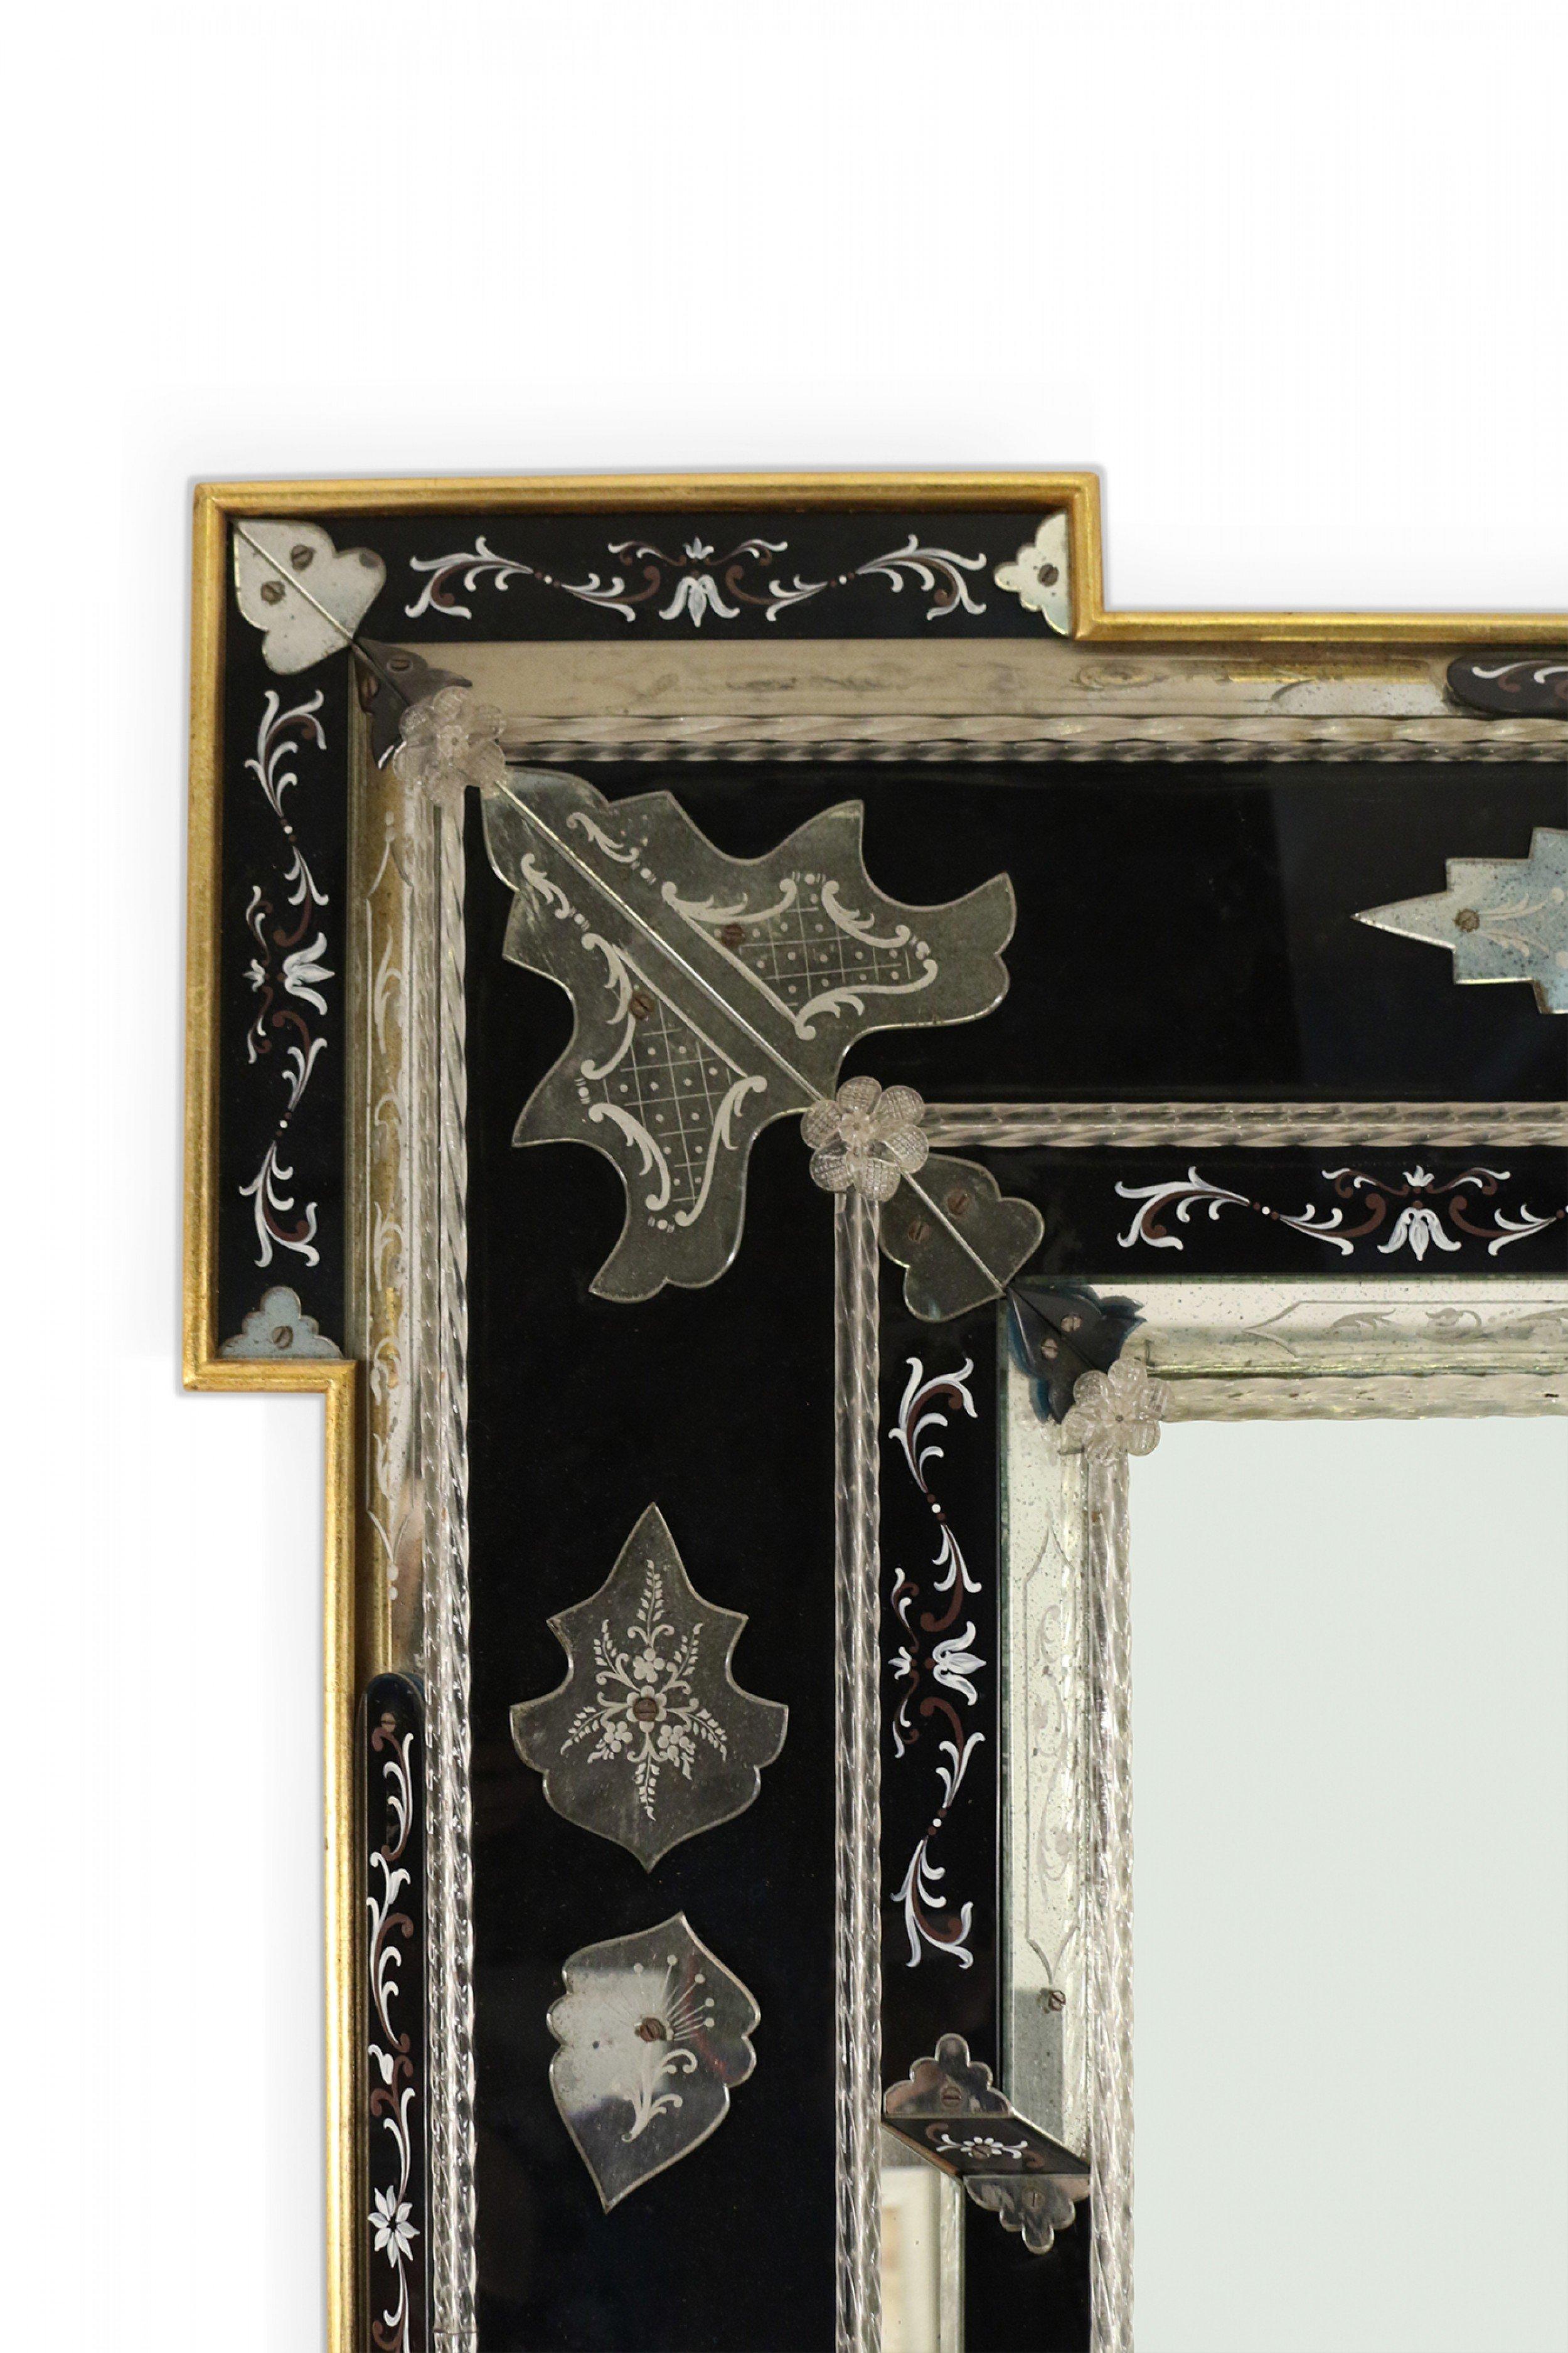 Monumental Italian Venetian-style (20th Century) rectangular wall mirror with applied etched Roman neoclassic (4) oval panels and scroll trim over dark blue glass sections with painted scroll design and giltwood edge.